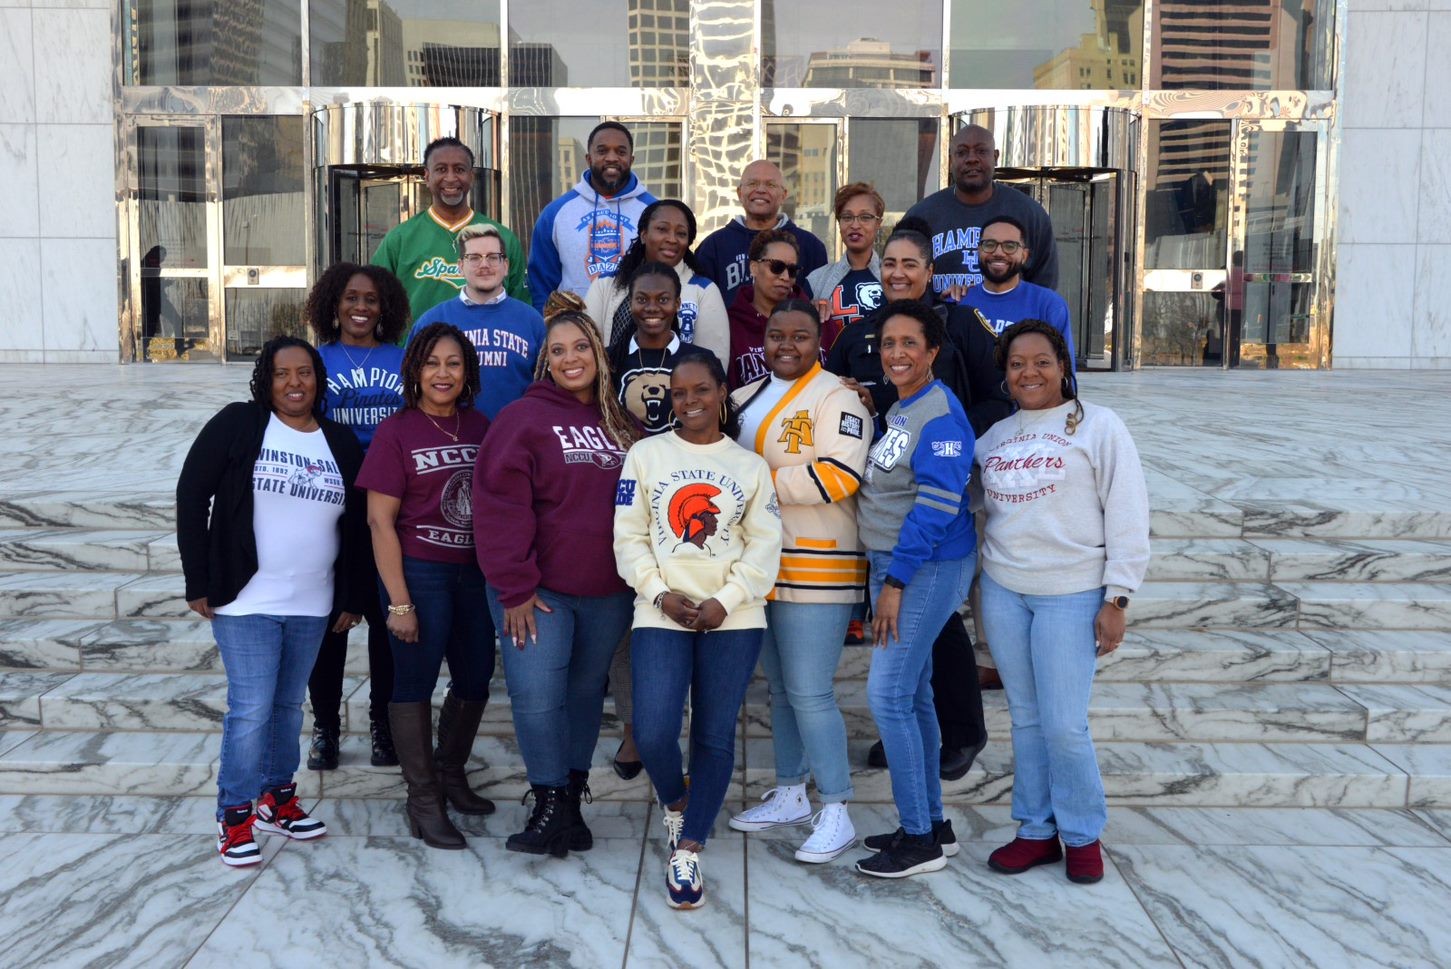 Richmond Fed employees representing HBCU alma maters during Black History Month. 